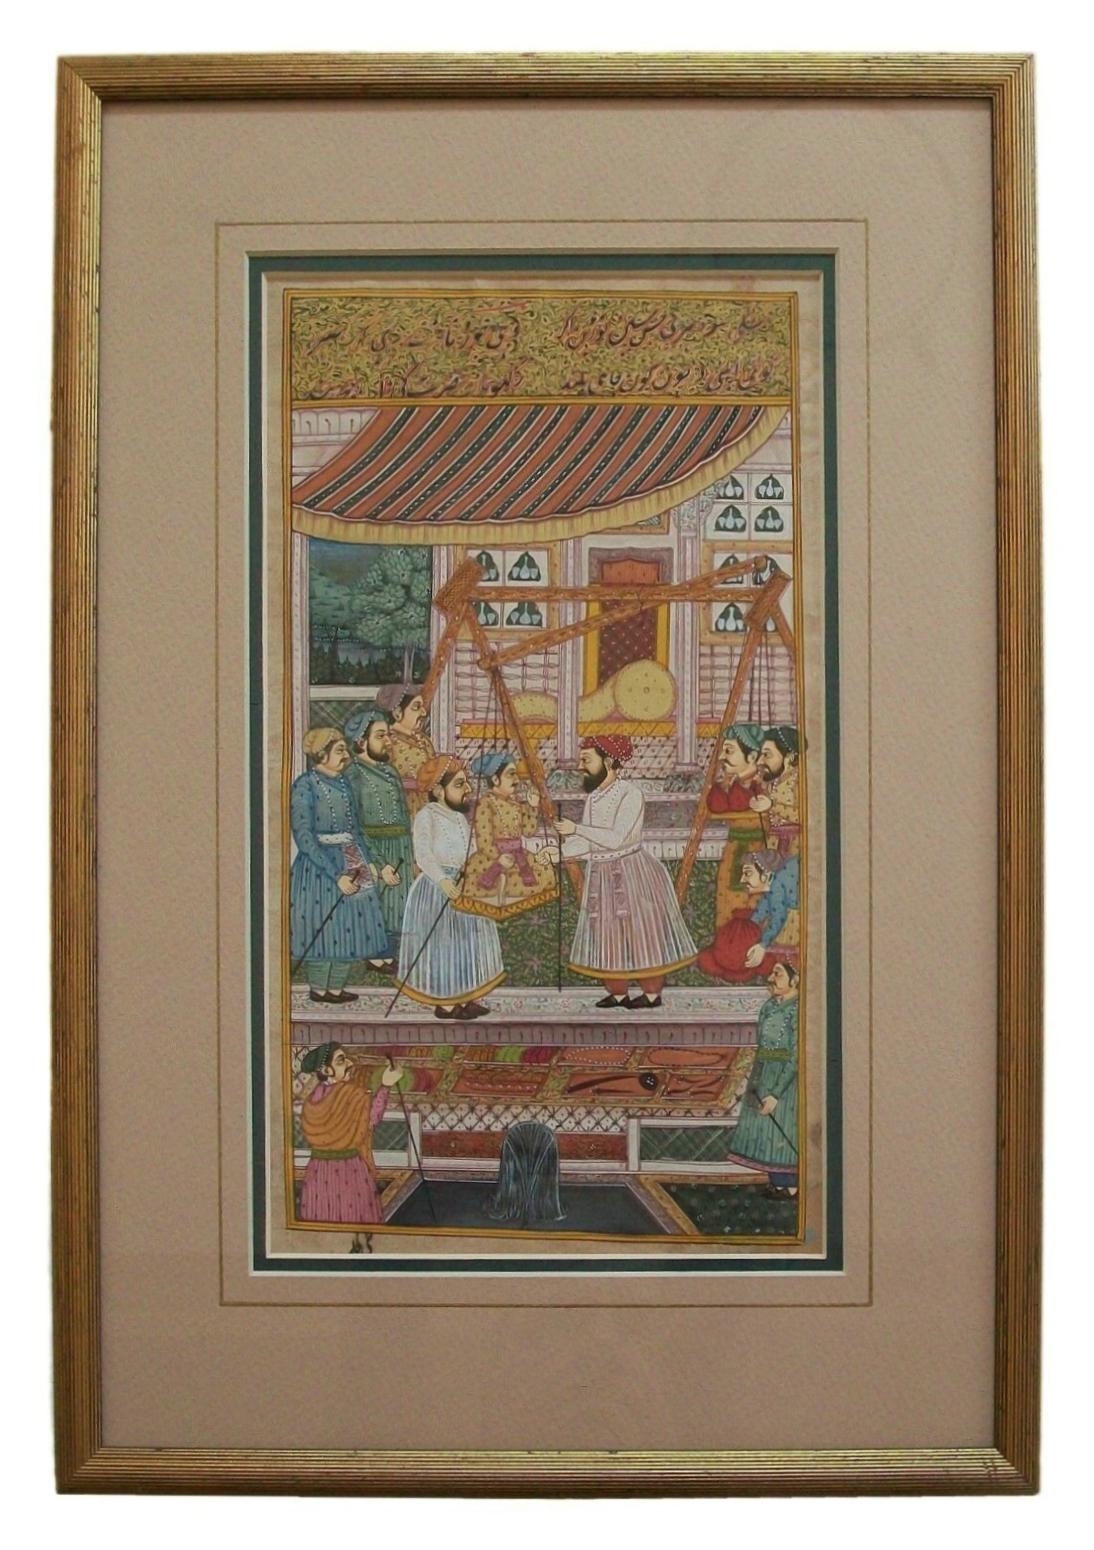 Anglo-Indian Mughal Style Miniature Court Scene Painting - Framed - India - 20th Century